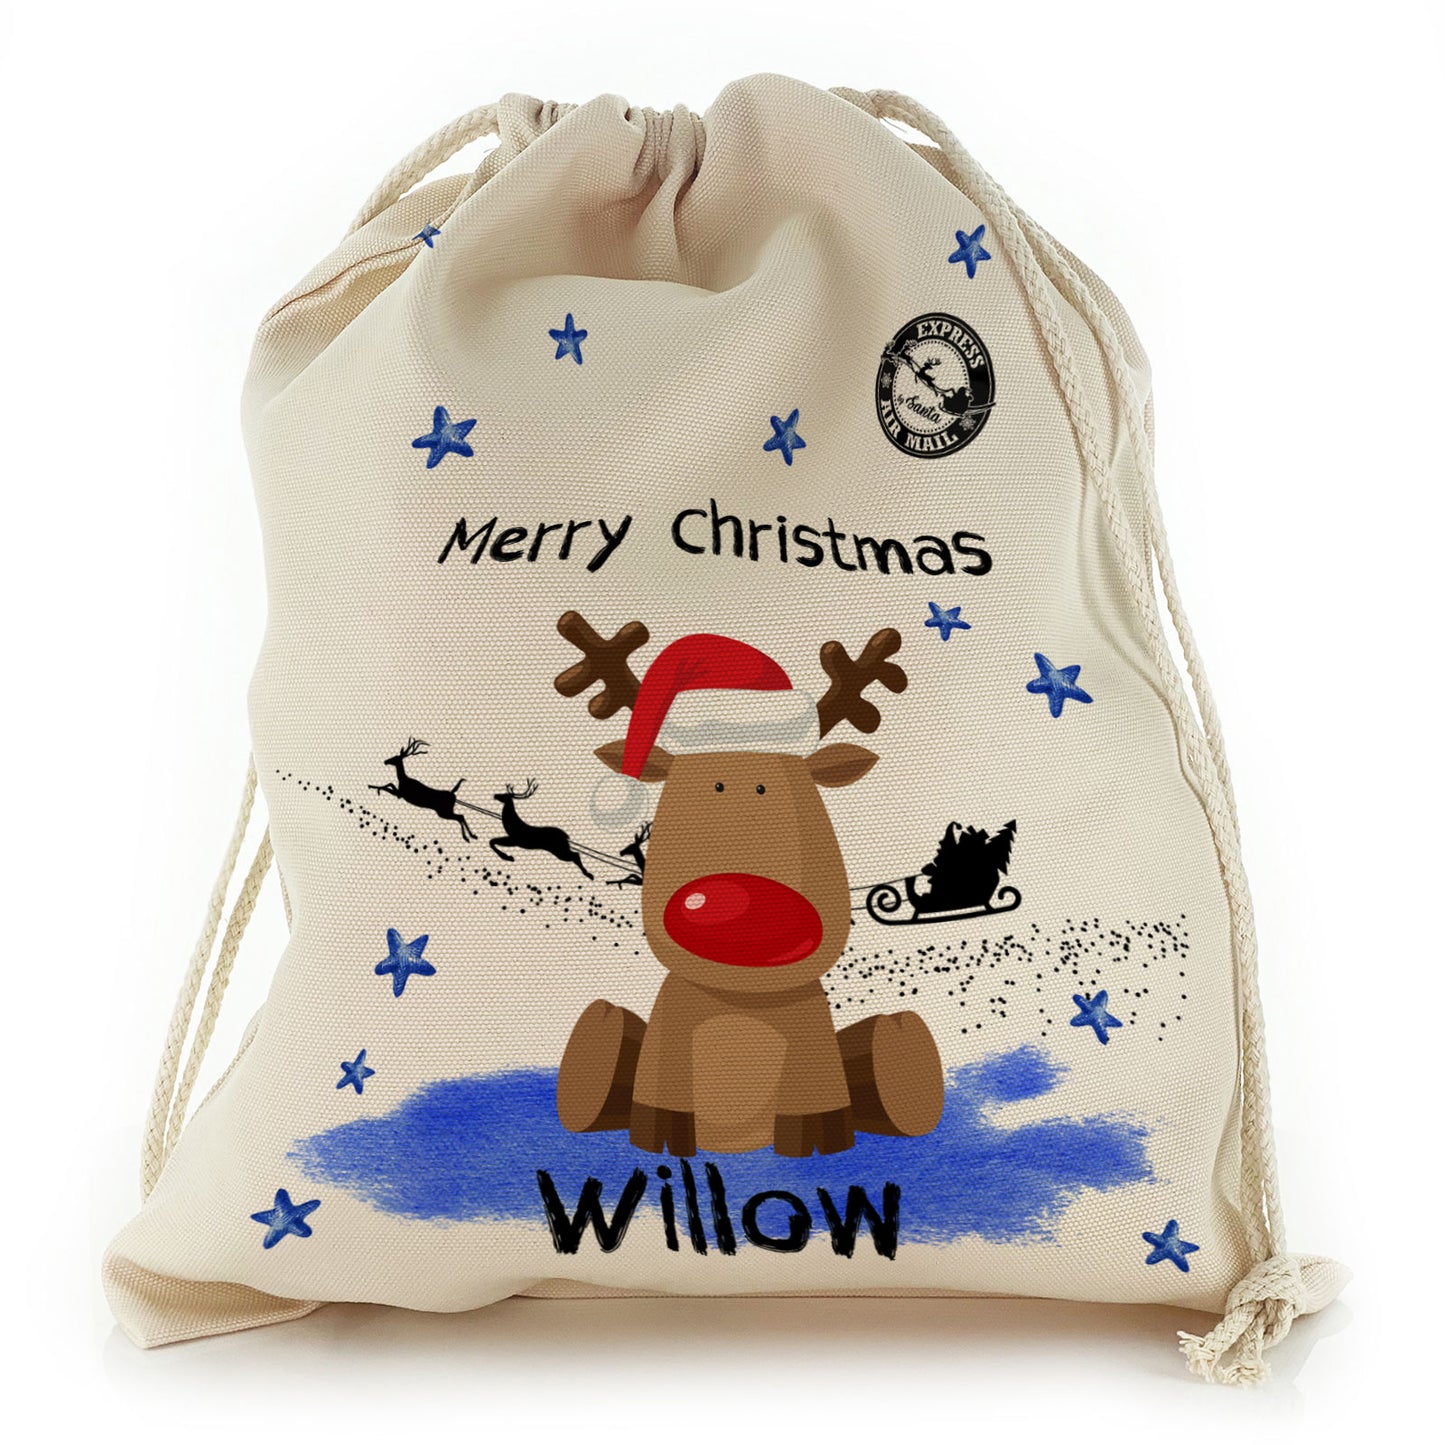 Personalised Christmas Gift Sack - Rudolph the Red Nose Reindeer